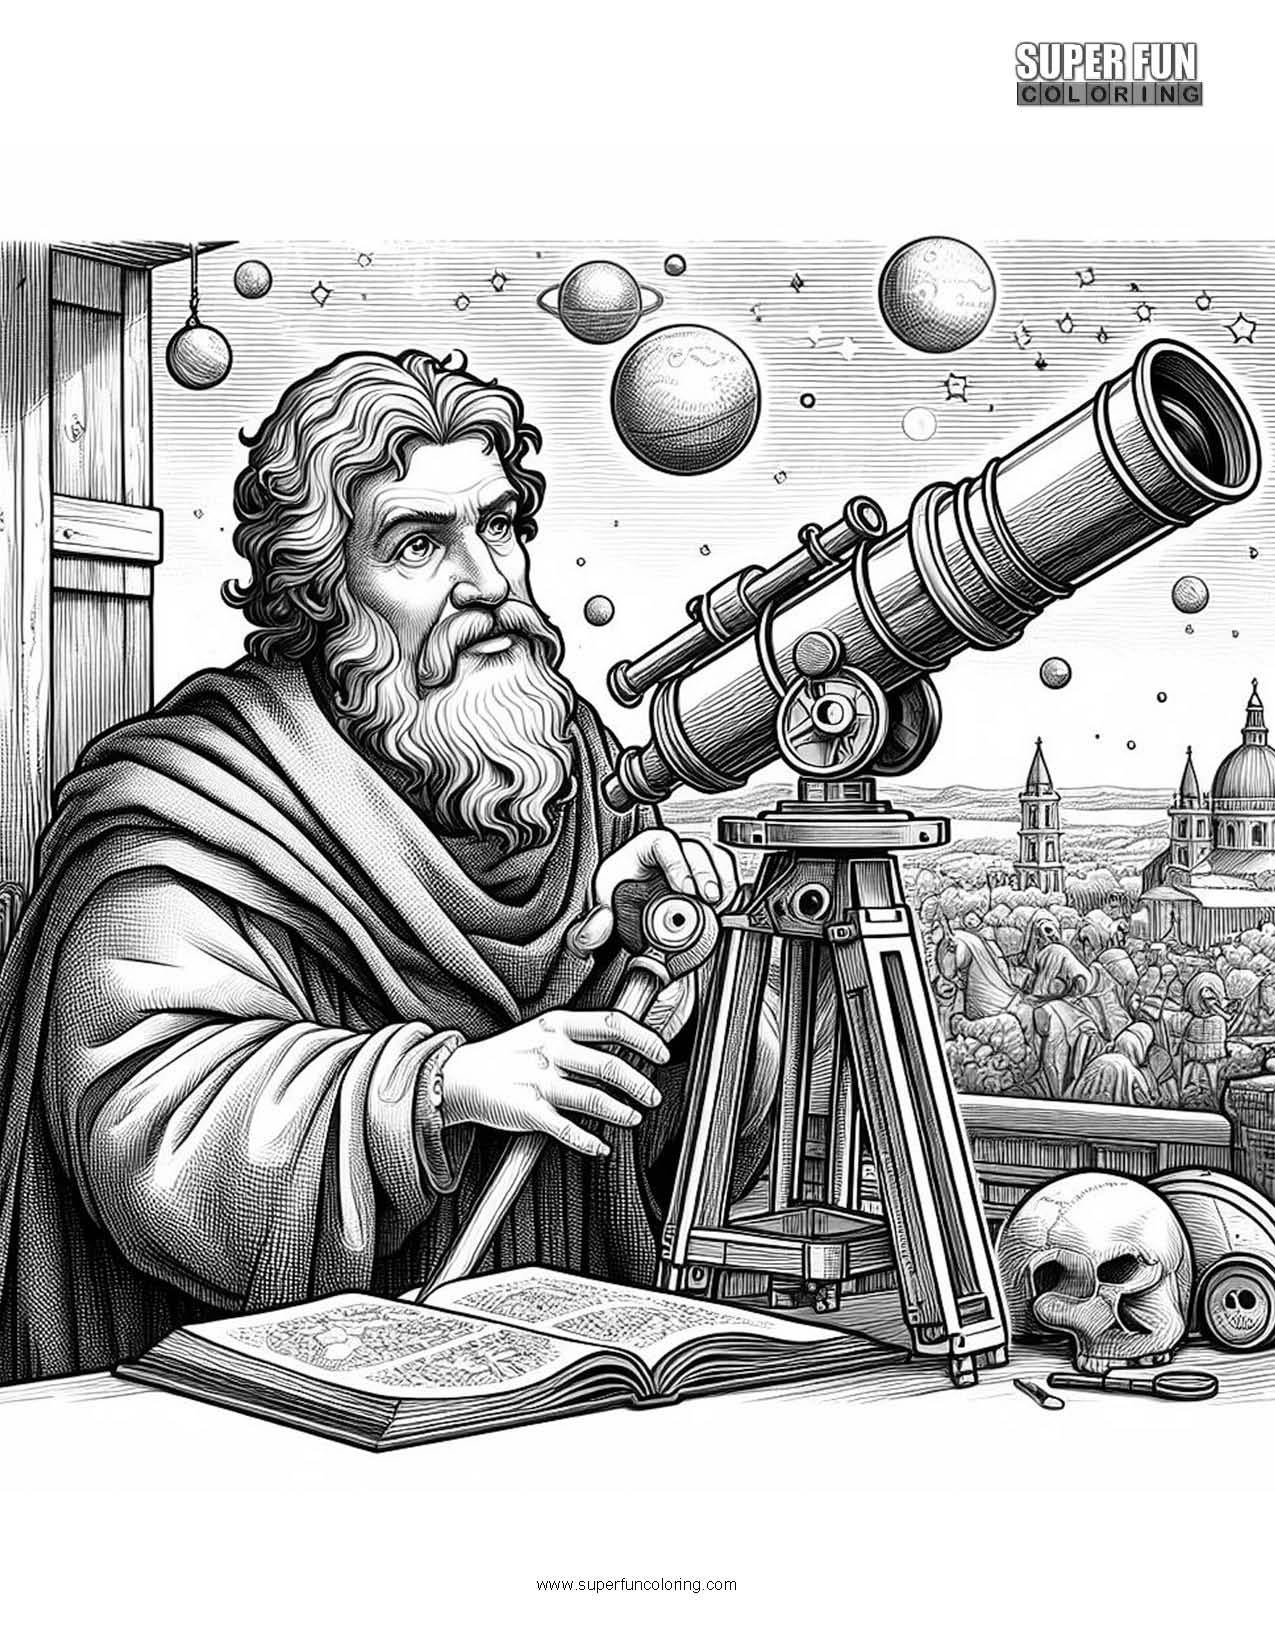 Galileo Sketched the Moon as He Saw It Through His Telescope in 1609